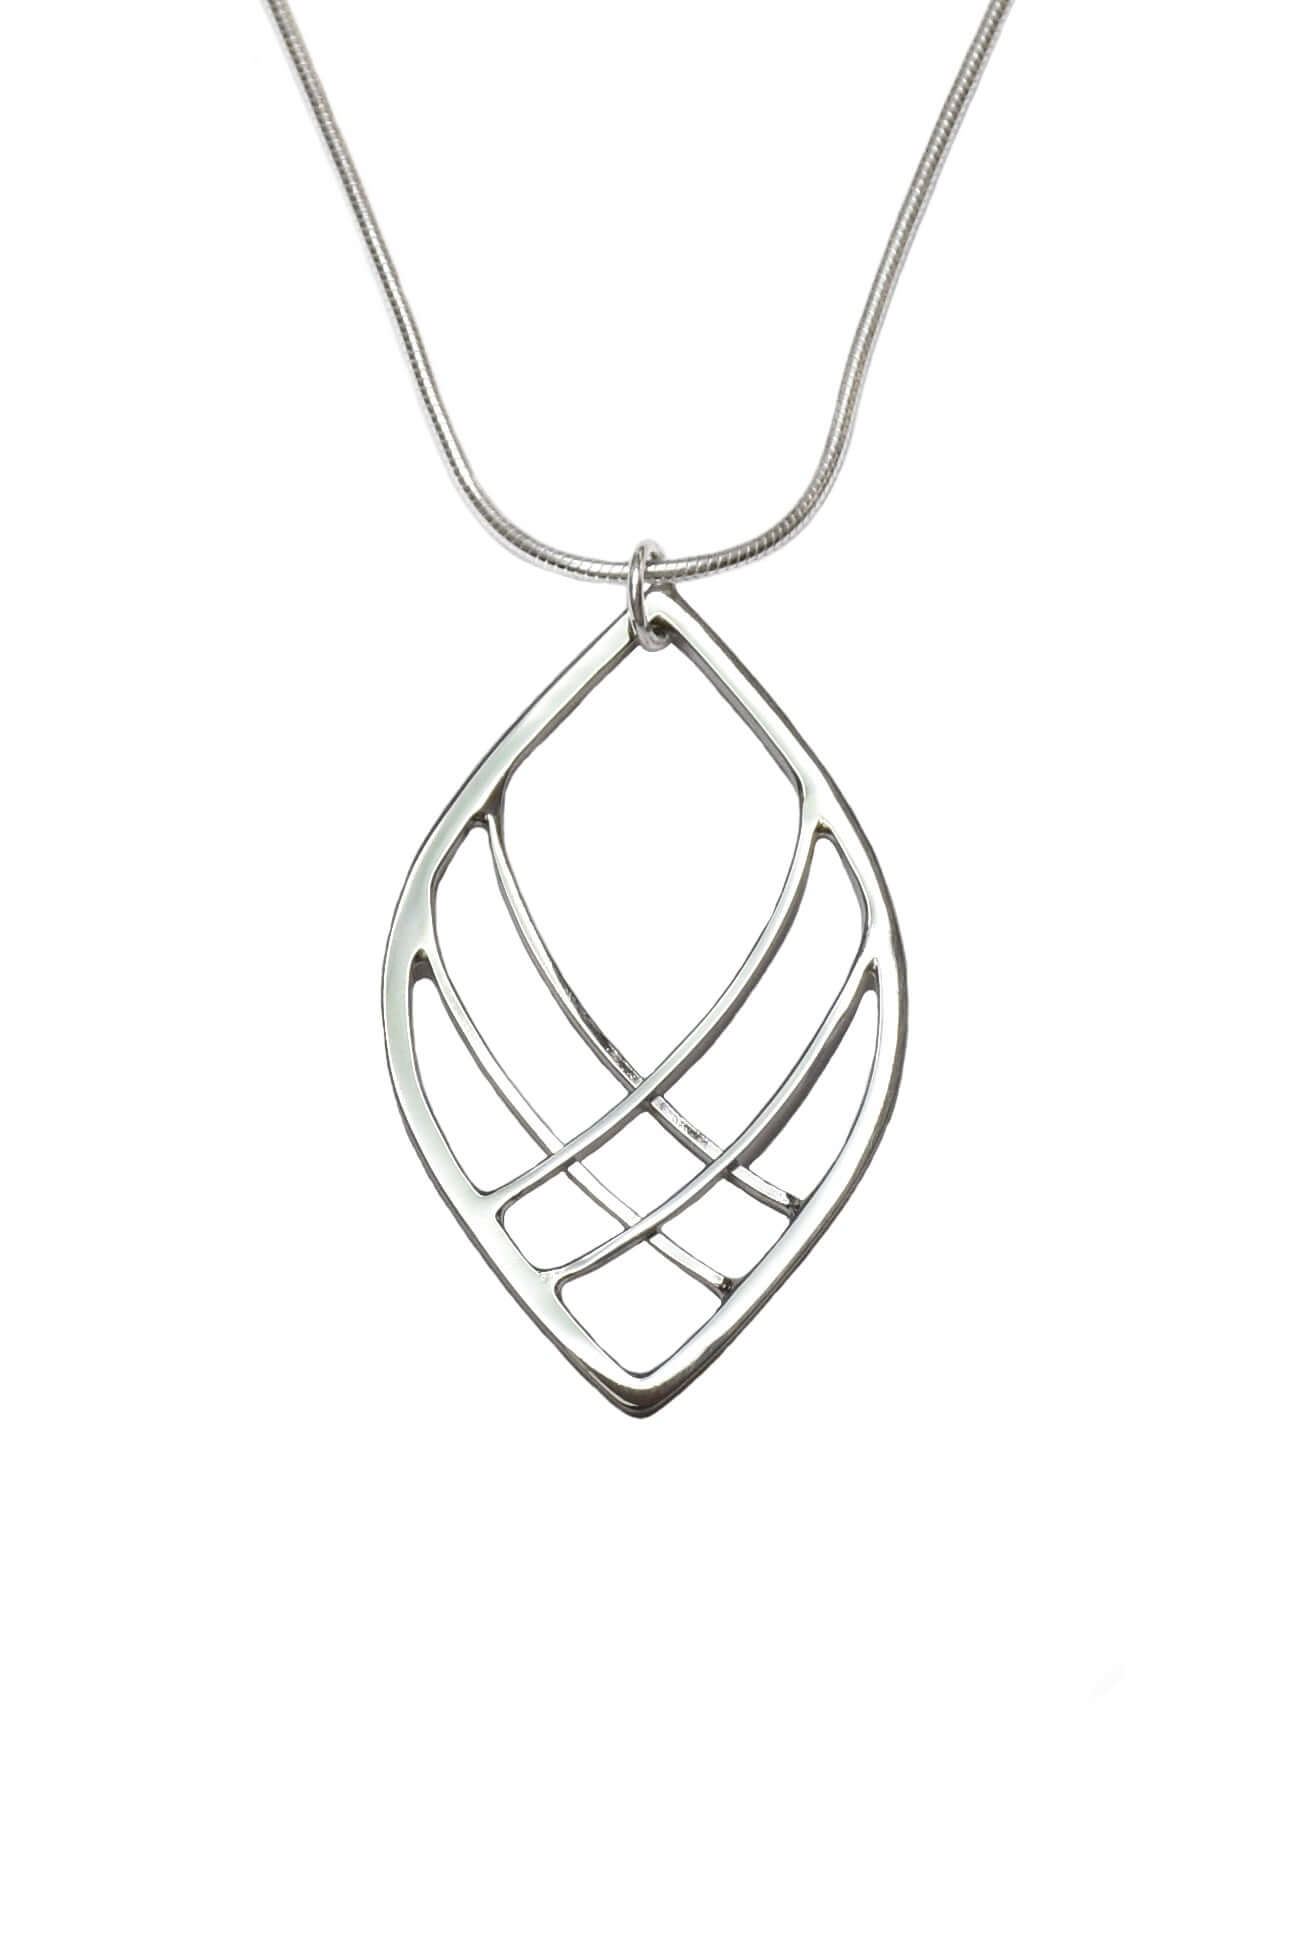 A woven handmade sterling silver leaf pendant on a silver chain